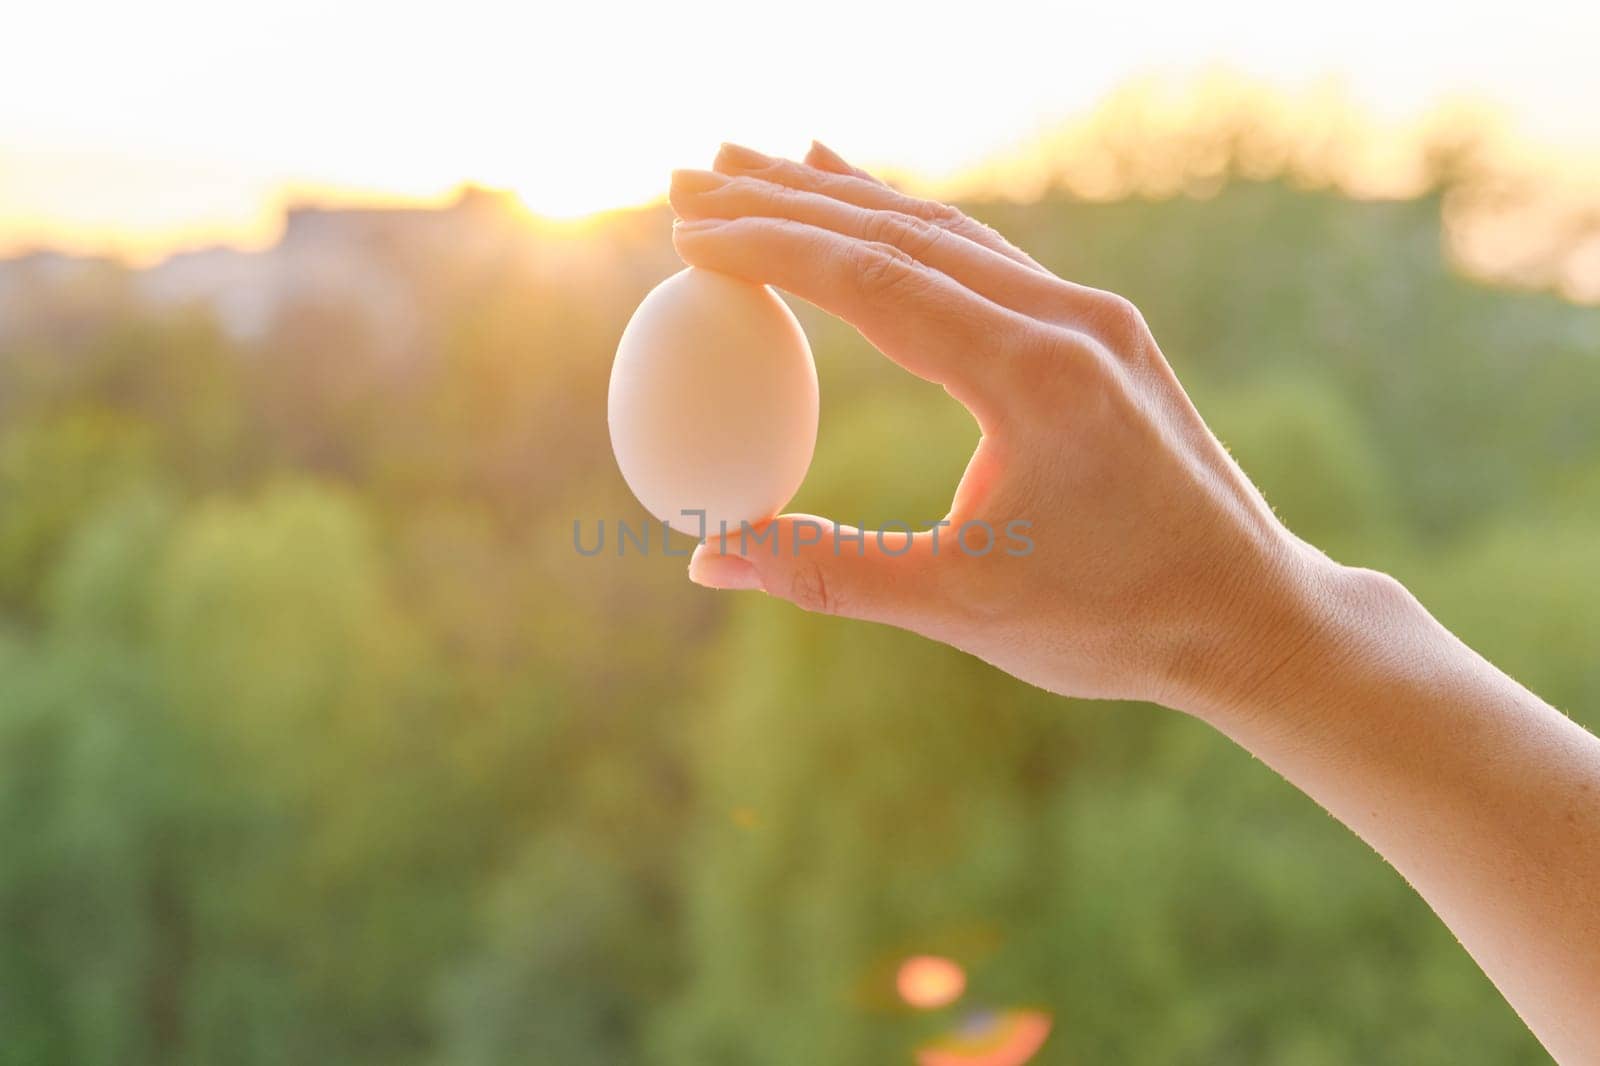 Hand holding one white egg, conceptual photo background sunset by VH-studio